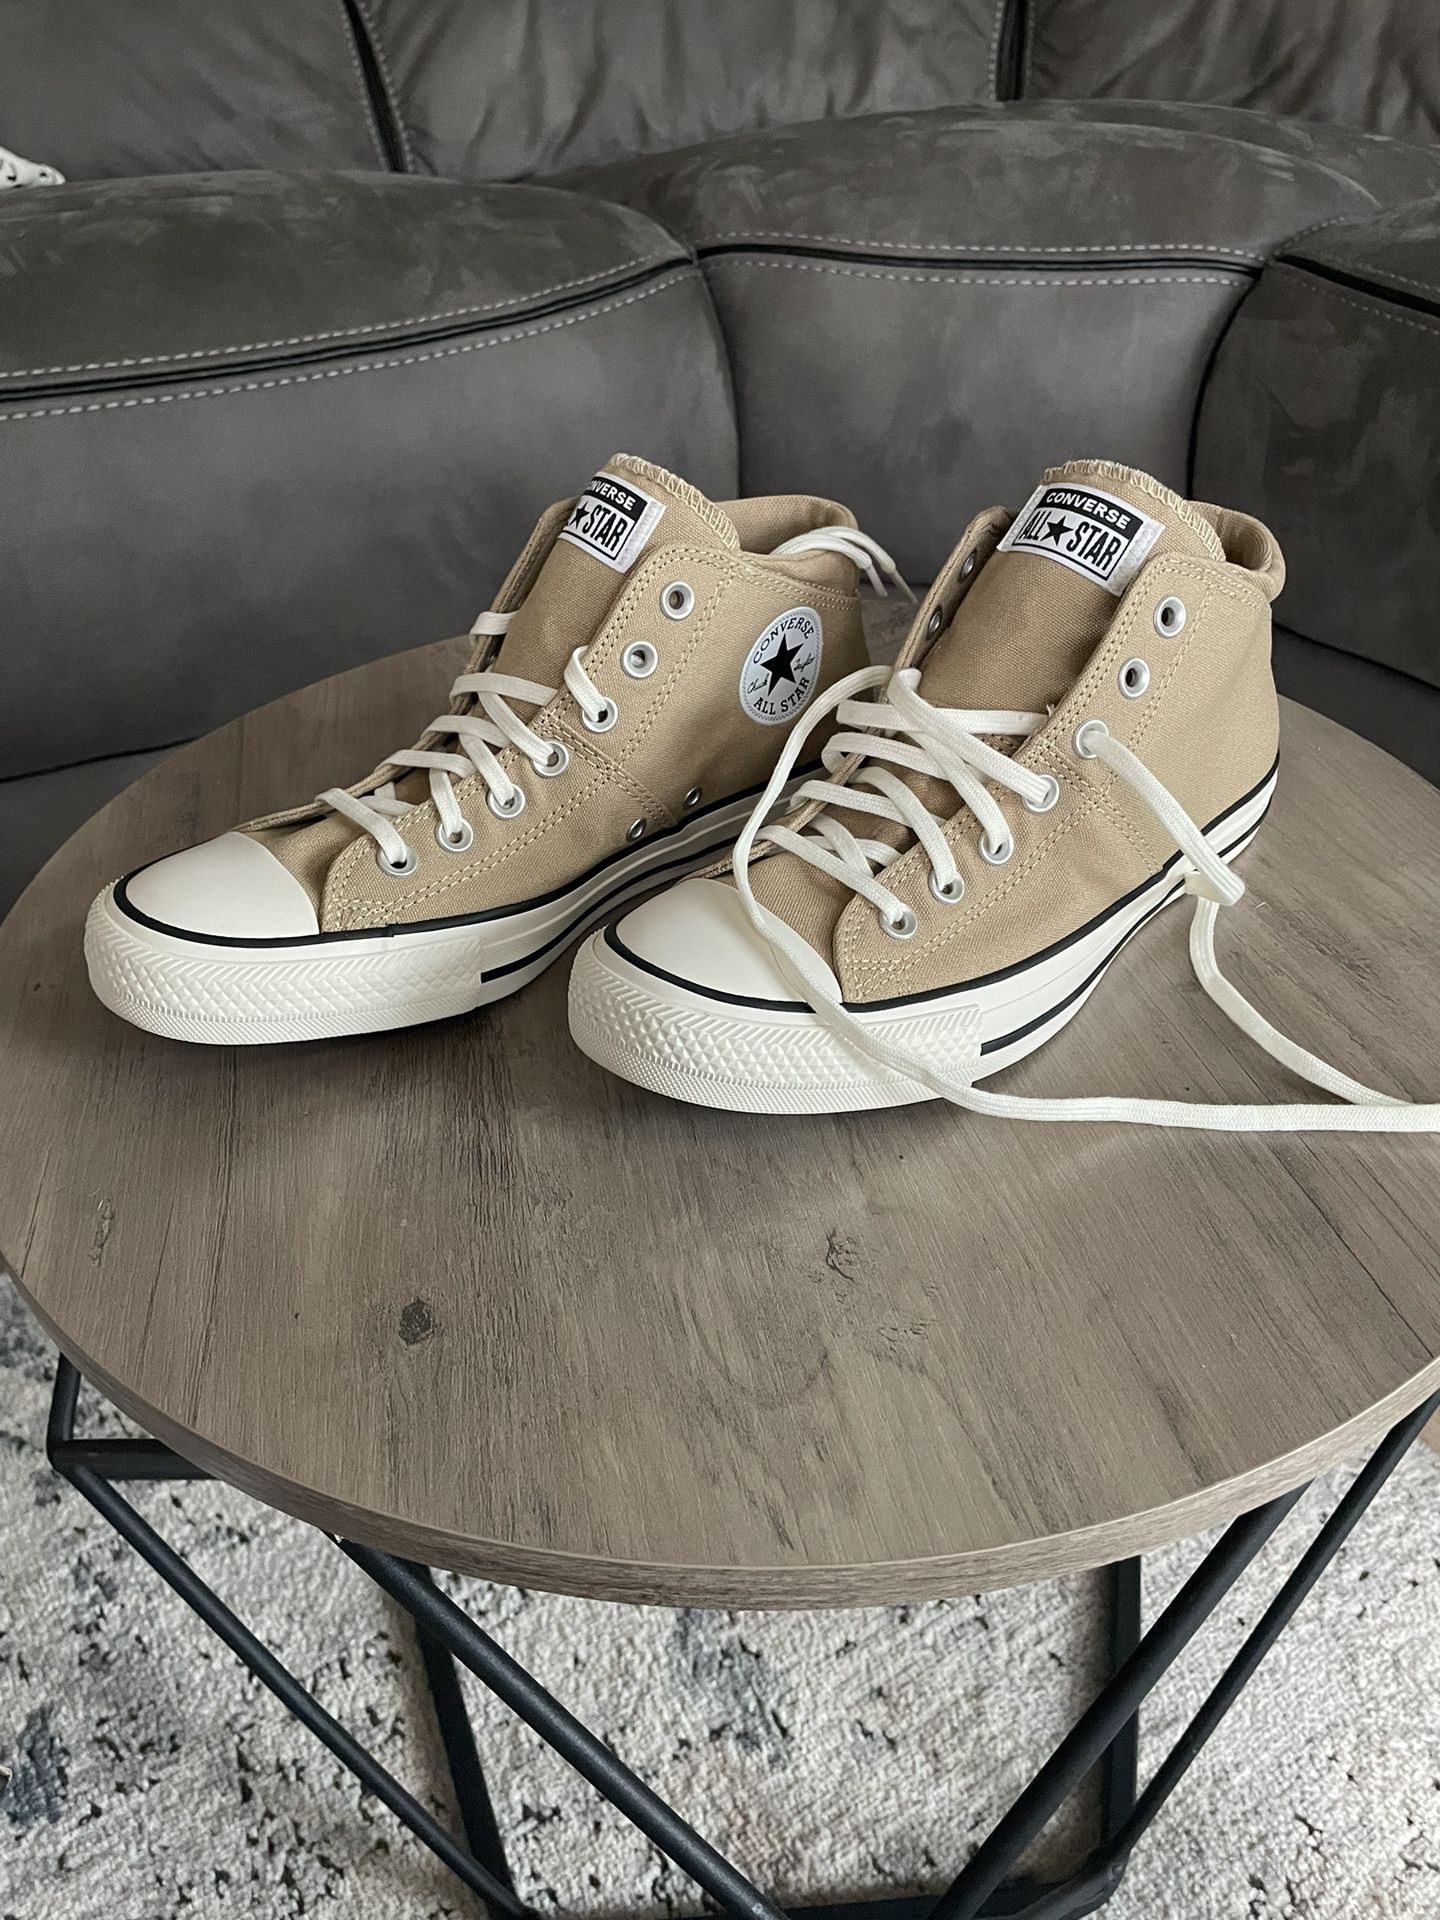 Converse All Star Shoes - Women 10 - BRAND NEW